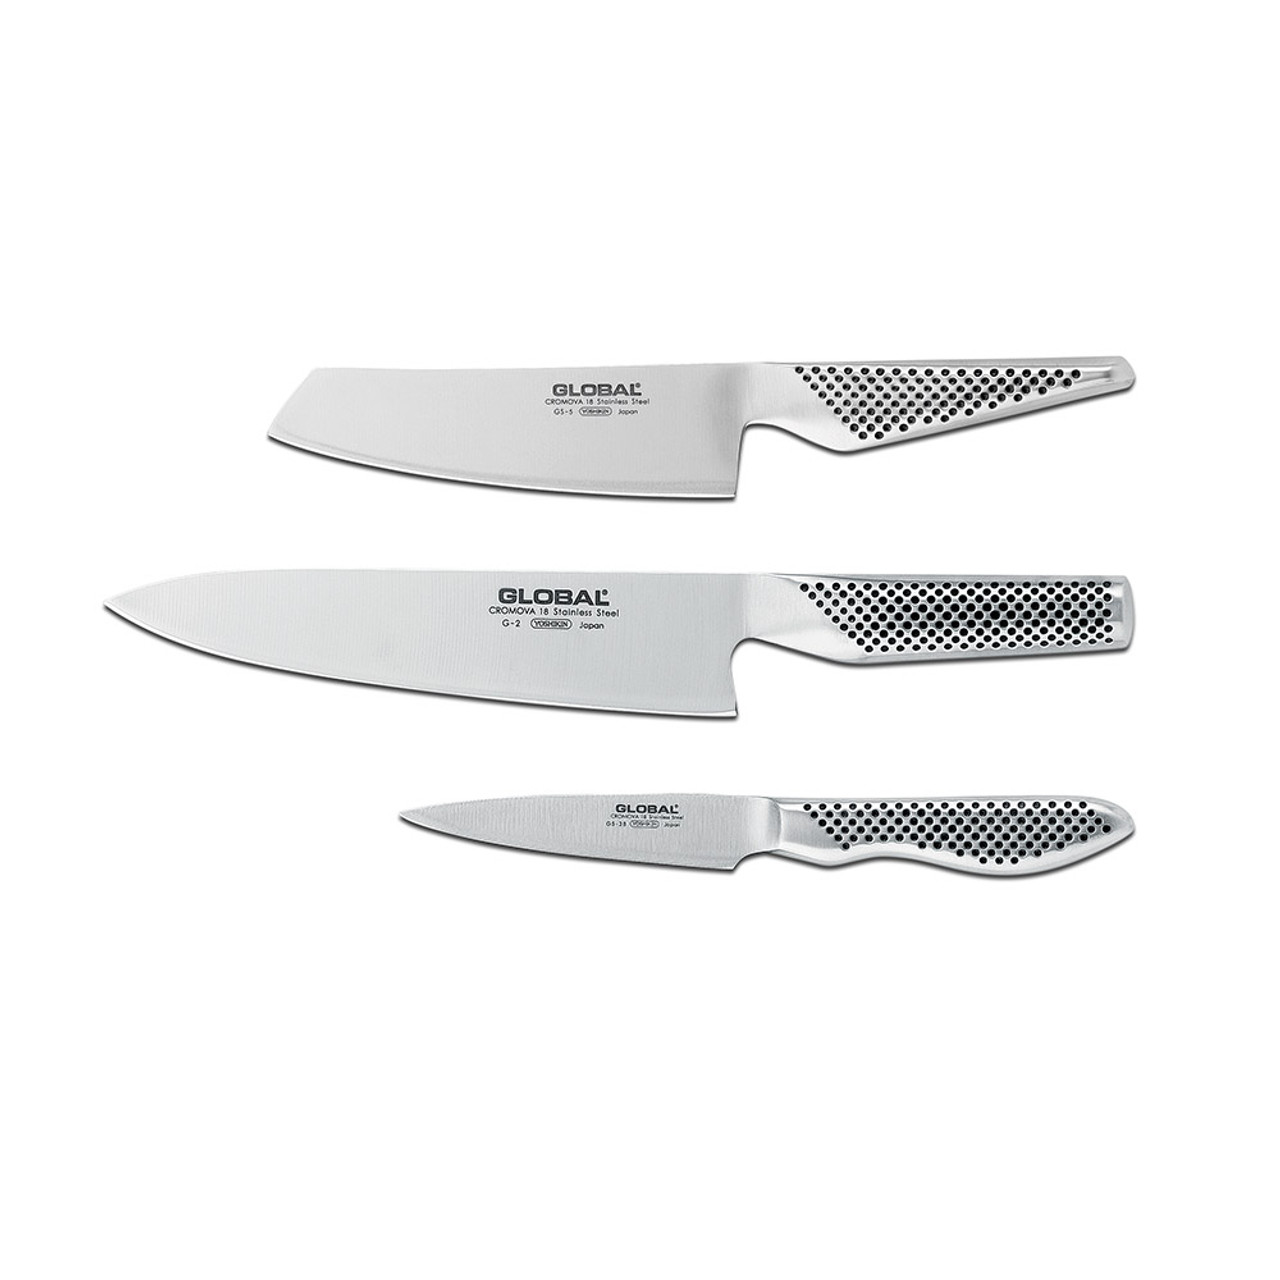 https://cdn11.bigcommerce.com/s-hccytny0od/images/stencil/1280x1280/products/322/4089/global-classic-3-piece-knife-set__47056.1514853577.jpg?c=2?imbypass=on